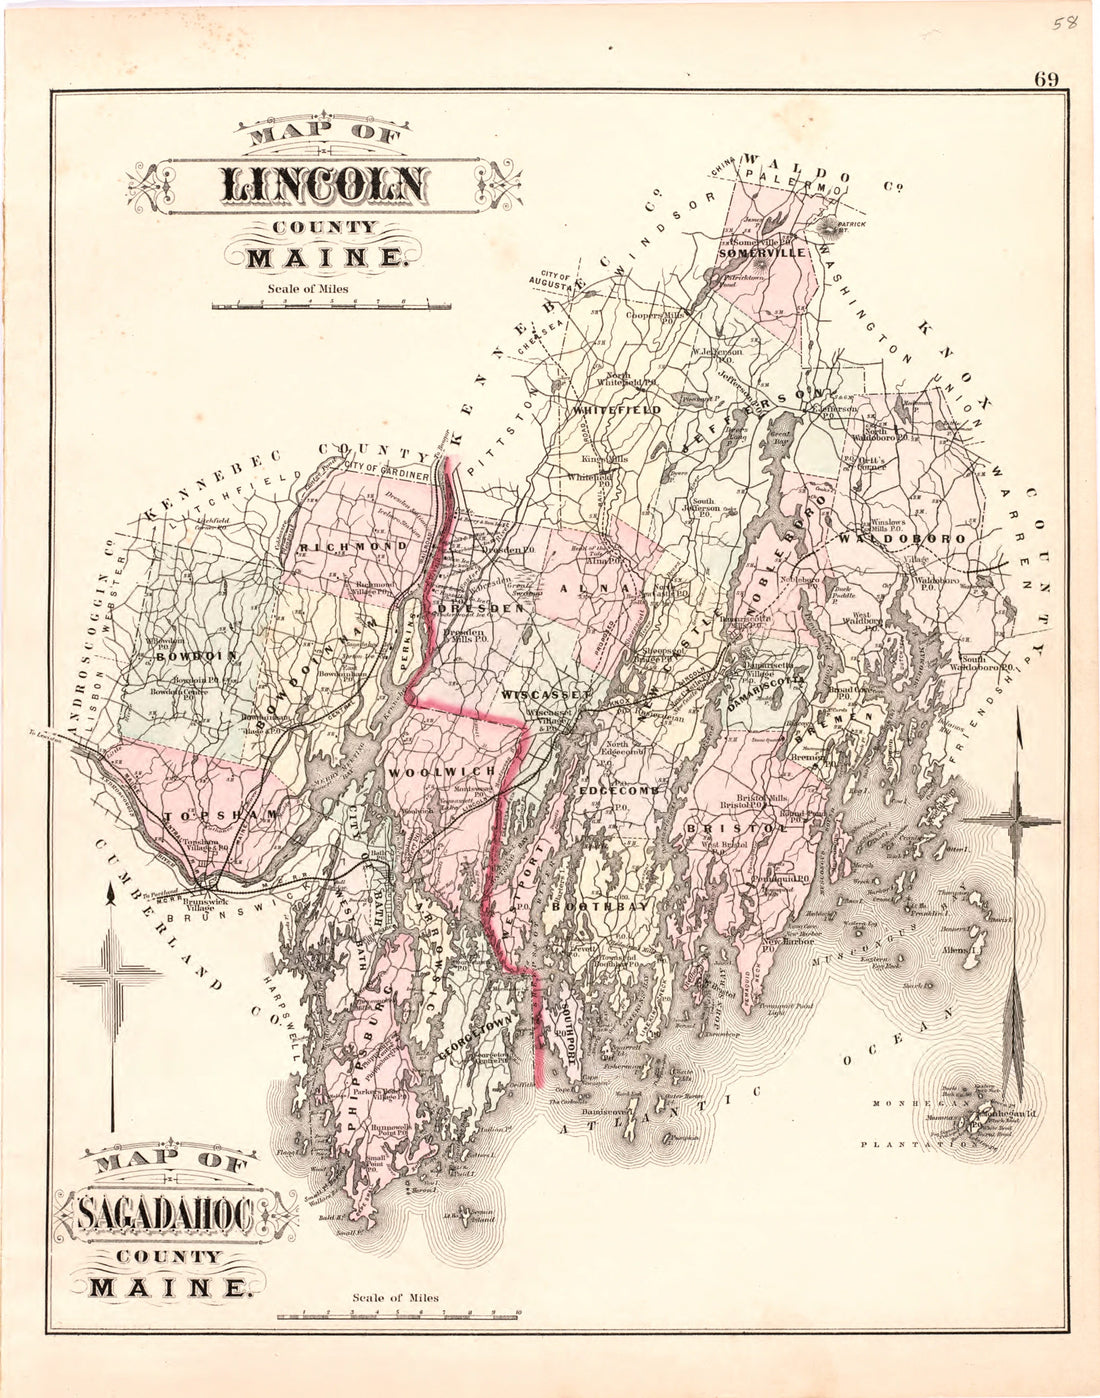 This hand drawn illustration (map) of Map of Lincoln County Maine; Map of Sagadahoc County Maine from Colby&